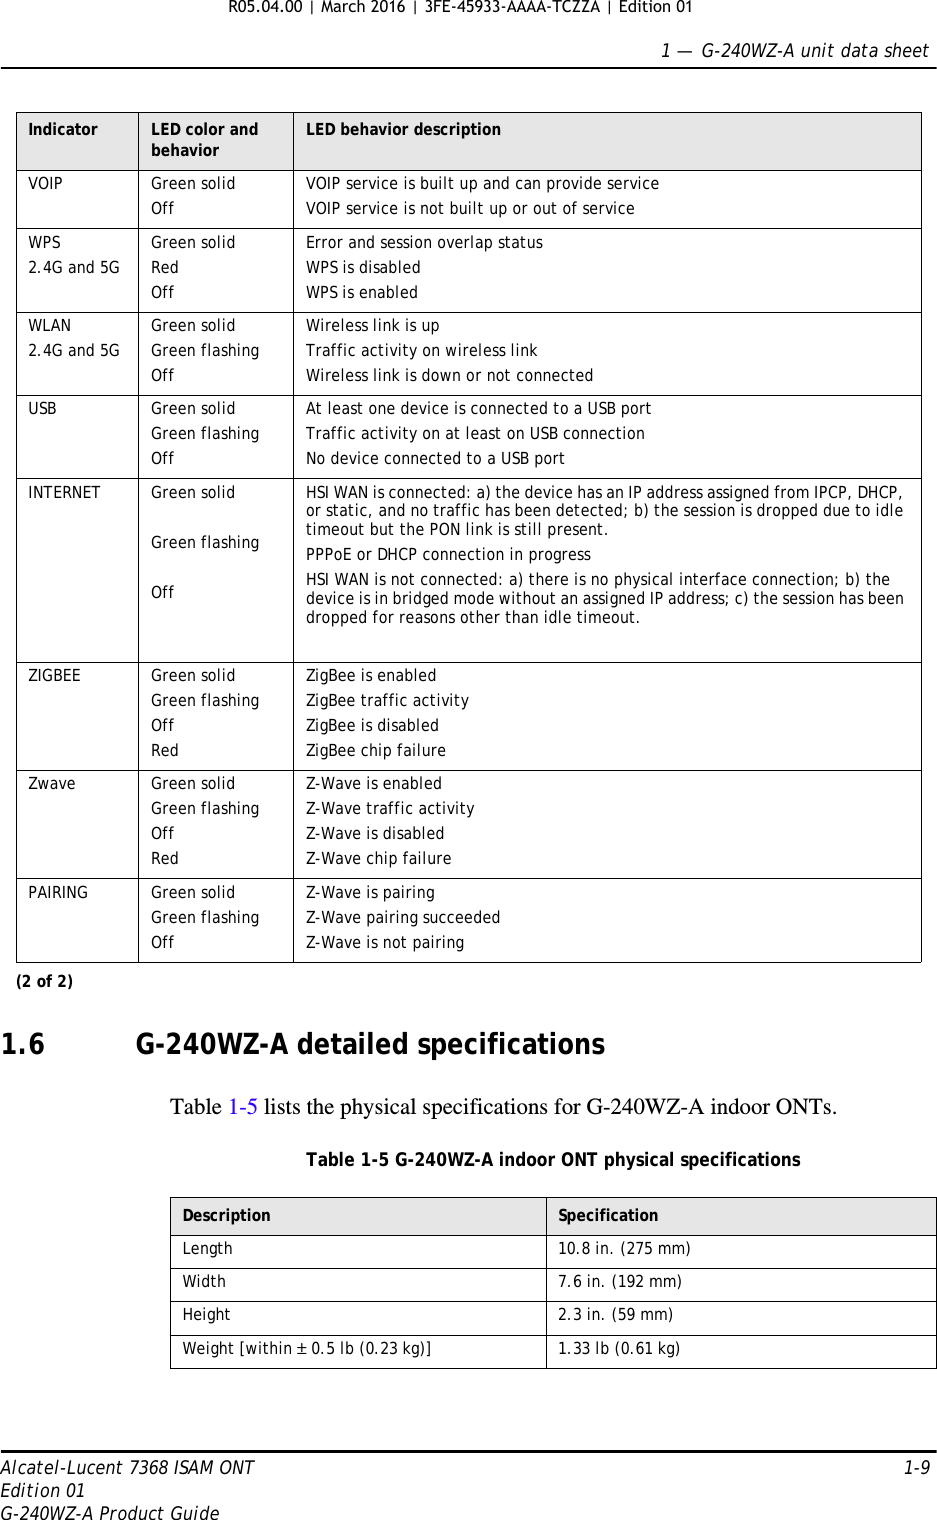 1 —  G-240WZ-A unit data sheetAlcatel-Lucent 7368 ISAM ONT 1-9Edition 01G-240WZ-A Product Guide1.6 G-240WZ-A detailed specificationsTable 1-5 lists the physical specifications for G-240WZ-A indoor ONTs.Table 1-5 G-240WZ-A indoor ONT physical specificationsVOIP Green solidOffVOIP service is built up and can provide serviceVOIP service is not built up or out of serviceWPS2.4G and 5GGreen solidRedOffError and session overlap statusWPS is disabledWPS is enabledWLAN2.4G and 5GGreen solidGreen flashingOffWireless link is upTraffic activity on wireless linkWireless link is down or not connectedUSB Green solidGreen flashingOffAt least one device is connected to a USB portTraffic activity on at least on USB connectionNo device connected to a USB portINTERNET Green solid Green flashingOffHSI WAN is connected: a) the device has an IP address assigned from IPCP, DHCP, or static, and no traffic has been detected; b) the session is dropped due to idle timeout but the PON link is still present.PPPoE or DHCP connection in progressHSI WAN is not connected: a) there is no physical interface connection; b) the device is in bridged mode without an assigned IP address; c) the session has been dropped for reasons other than idle timeout.ZIGBEE Green solidGreen flashingOffRedZigBee is enabledZigBee traffic activityZigBee is disabledZigBee chip failureZwave Green solidGreen flashingOffRedZ-Wave is enabledZ-Wave traffic activityZ-Wave is disabledZ-Wave chip failurePAIRING Green solidGreen flashingOffZ-Wave is pairingZ-Wave pairing succeededZ-Wave is not pairingIndicator LED color and behavior LED behavior description(2 of 2)Description SpecificationLength 10.8 in. (275 mm)Width 7.6 in. (192 mm)Height 2.3 in. (59 mm)Weight [within ± 0.5 lb (0.23 kg)] 1.33 lb (0.61 kg)R05.04.00 | March 2016 | 3FE-45933-AAAA-TCZZA | Edition 01 